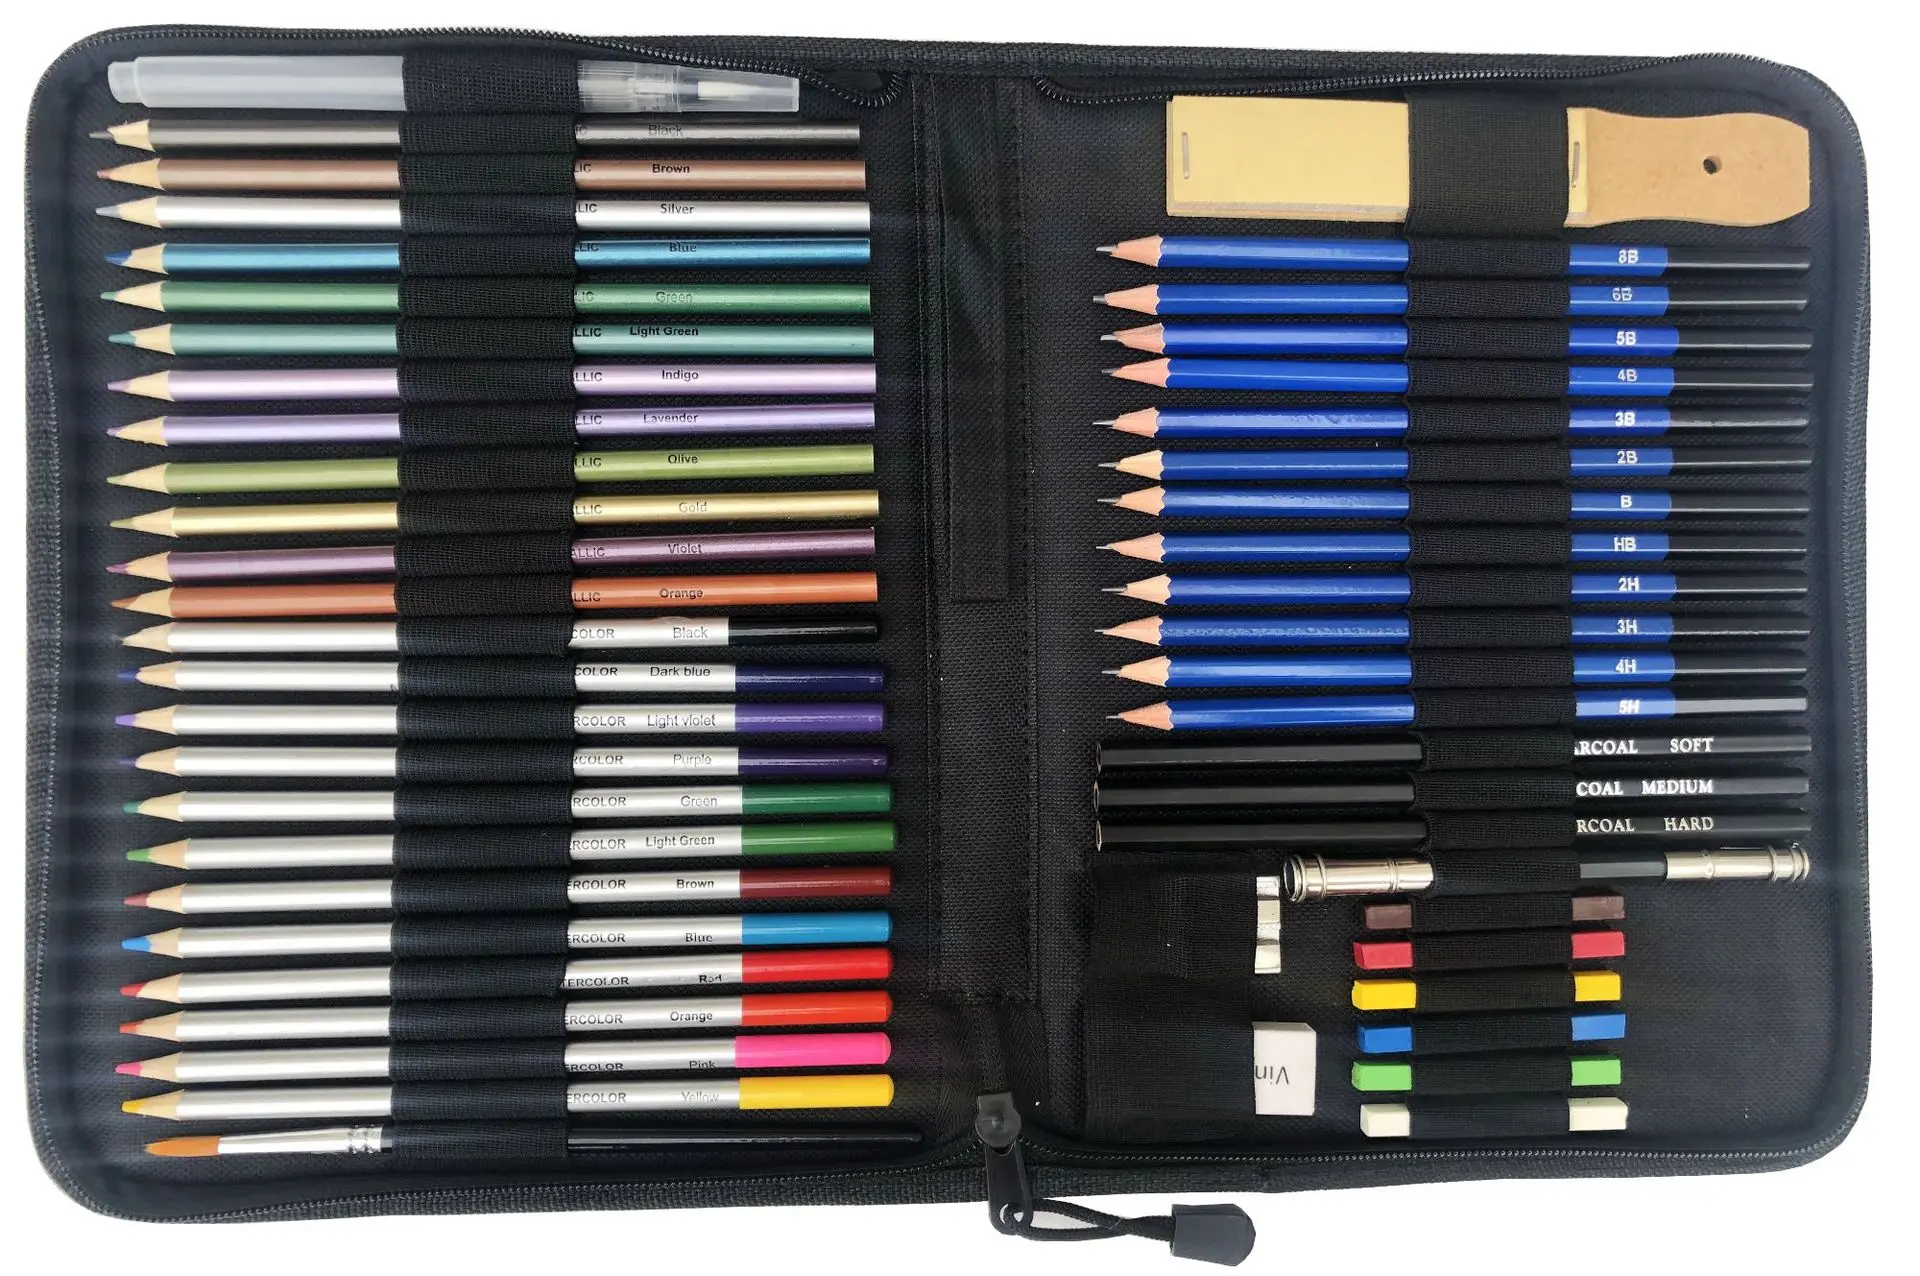 

51Pcs/set Professional Sketching Pencil Drawing Kit Graphite Shading Art Sketch Watercolor Pencils for Beginners & Pro Artists